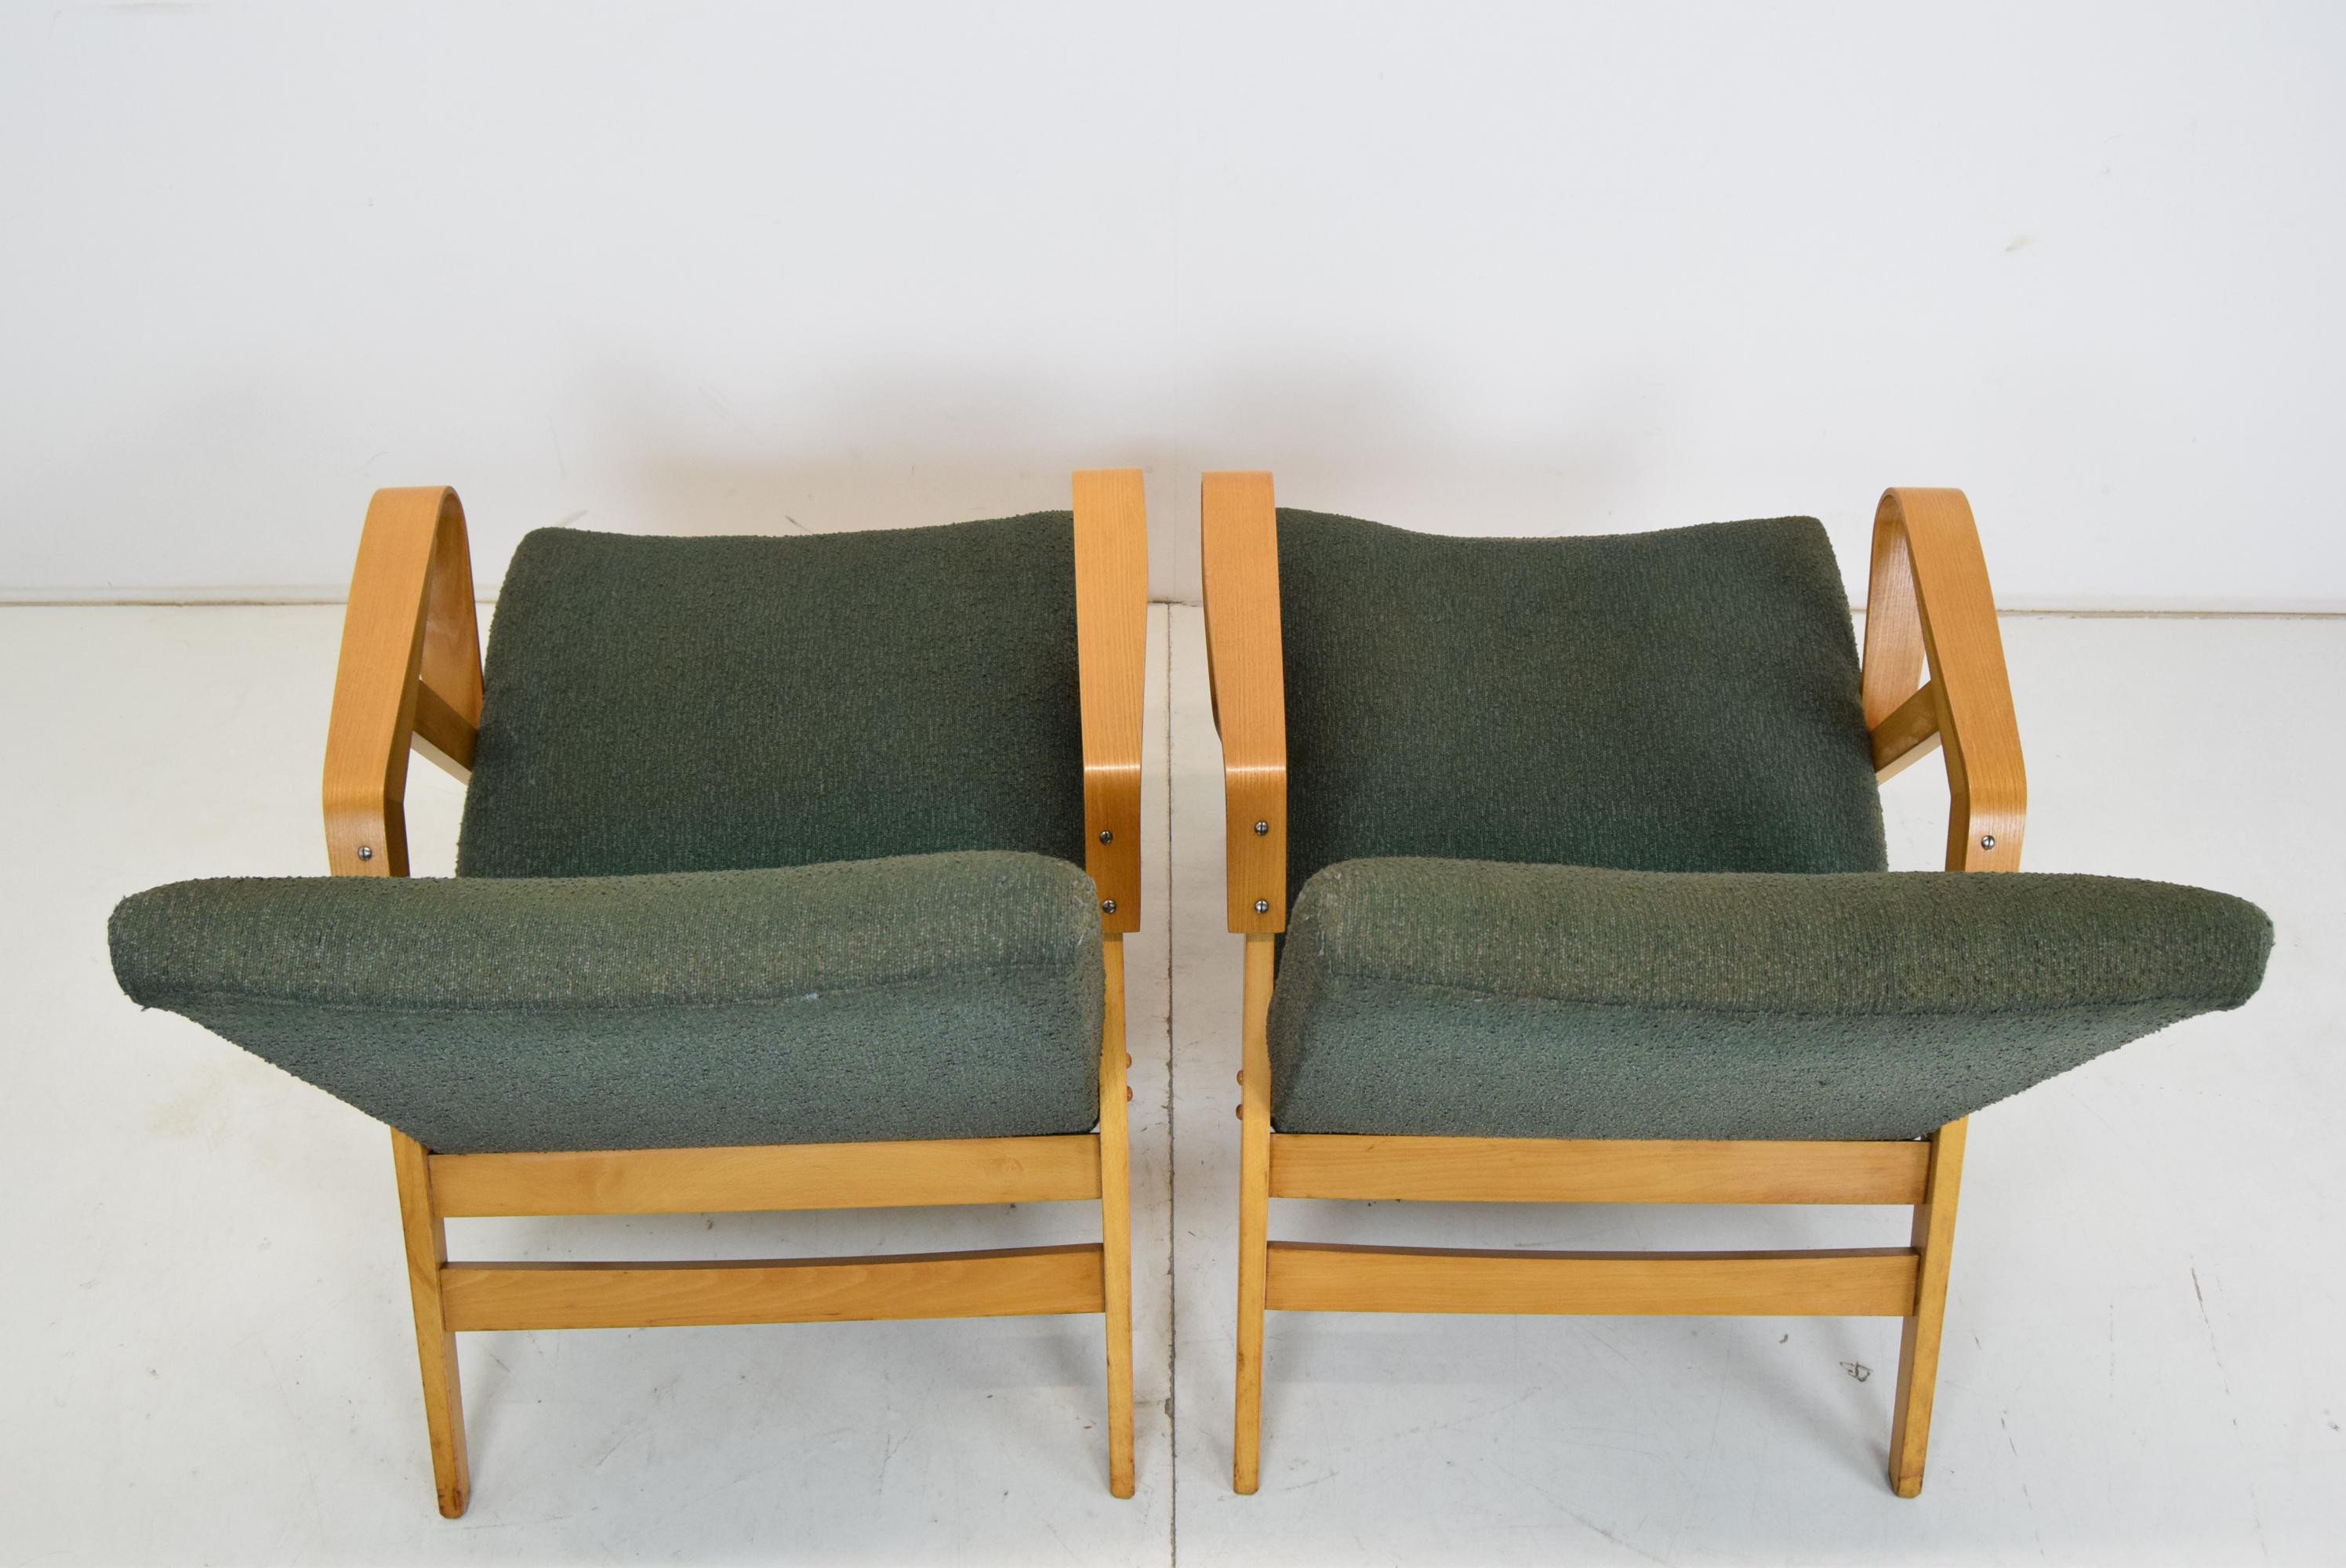 Pair of mid-century Bentwood Armchairs by Frantisek Jirak for Tatra, 1960's. For Sale 4